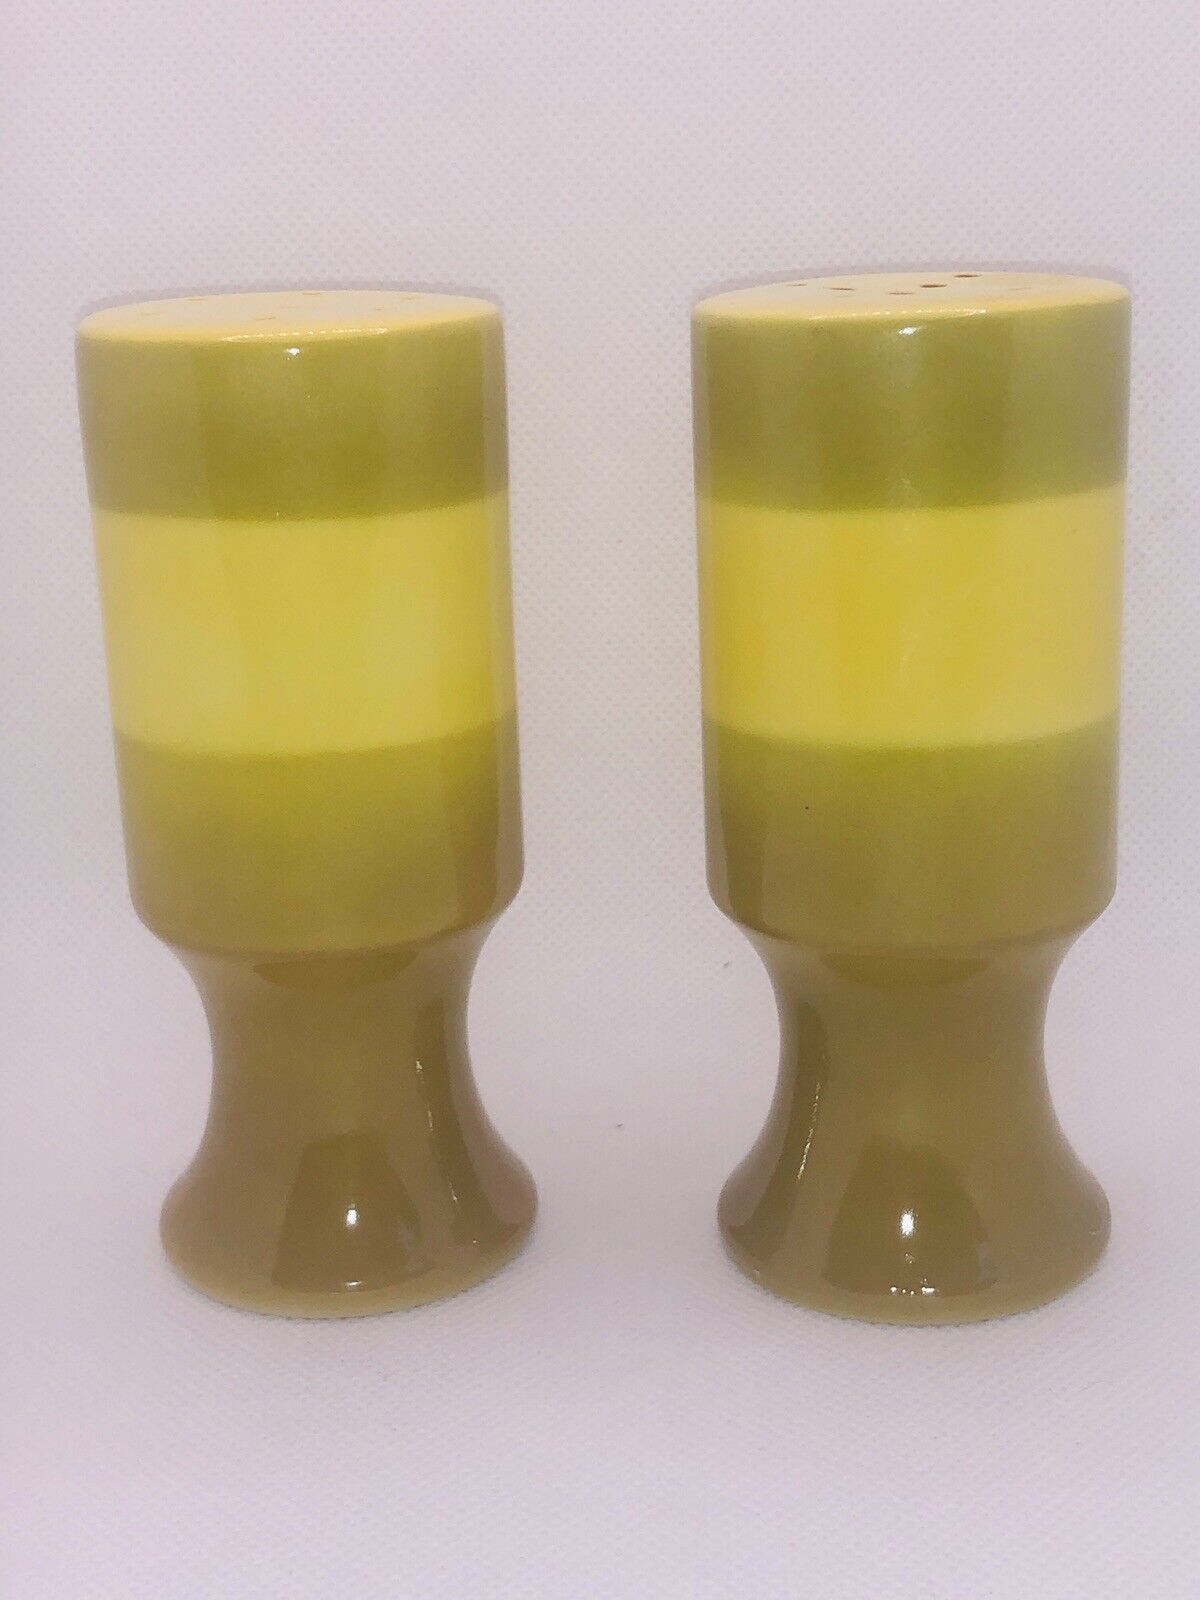 Vintage Mod Pair of 1960s Holt Howard Salt And Pepper Shakers Yellow and Green